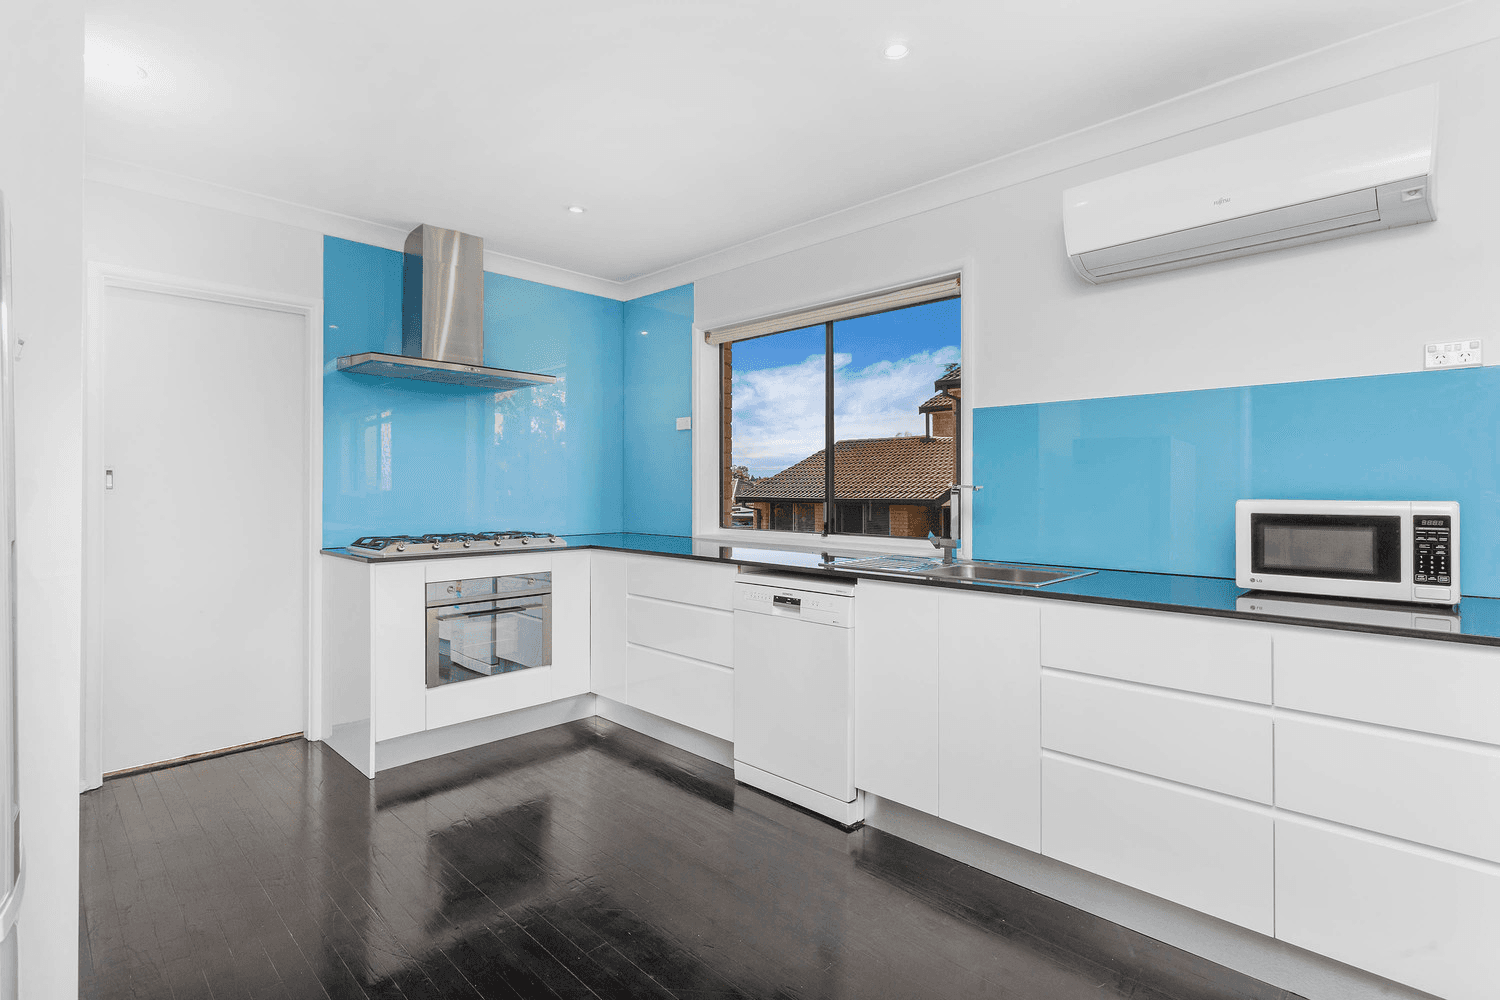 3/17 Doyle Road, Revesby, NSW 2212